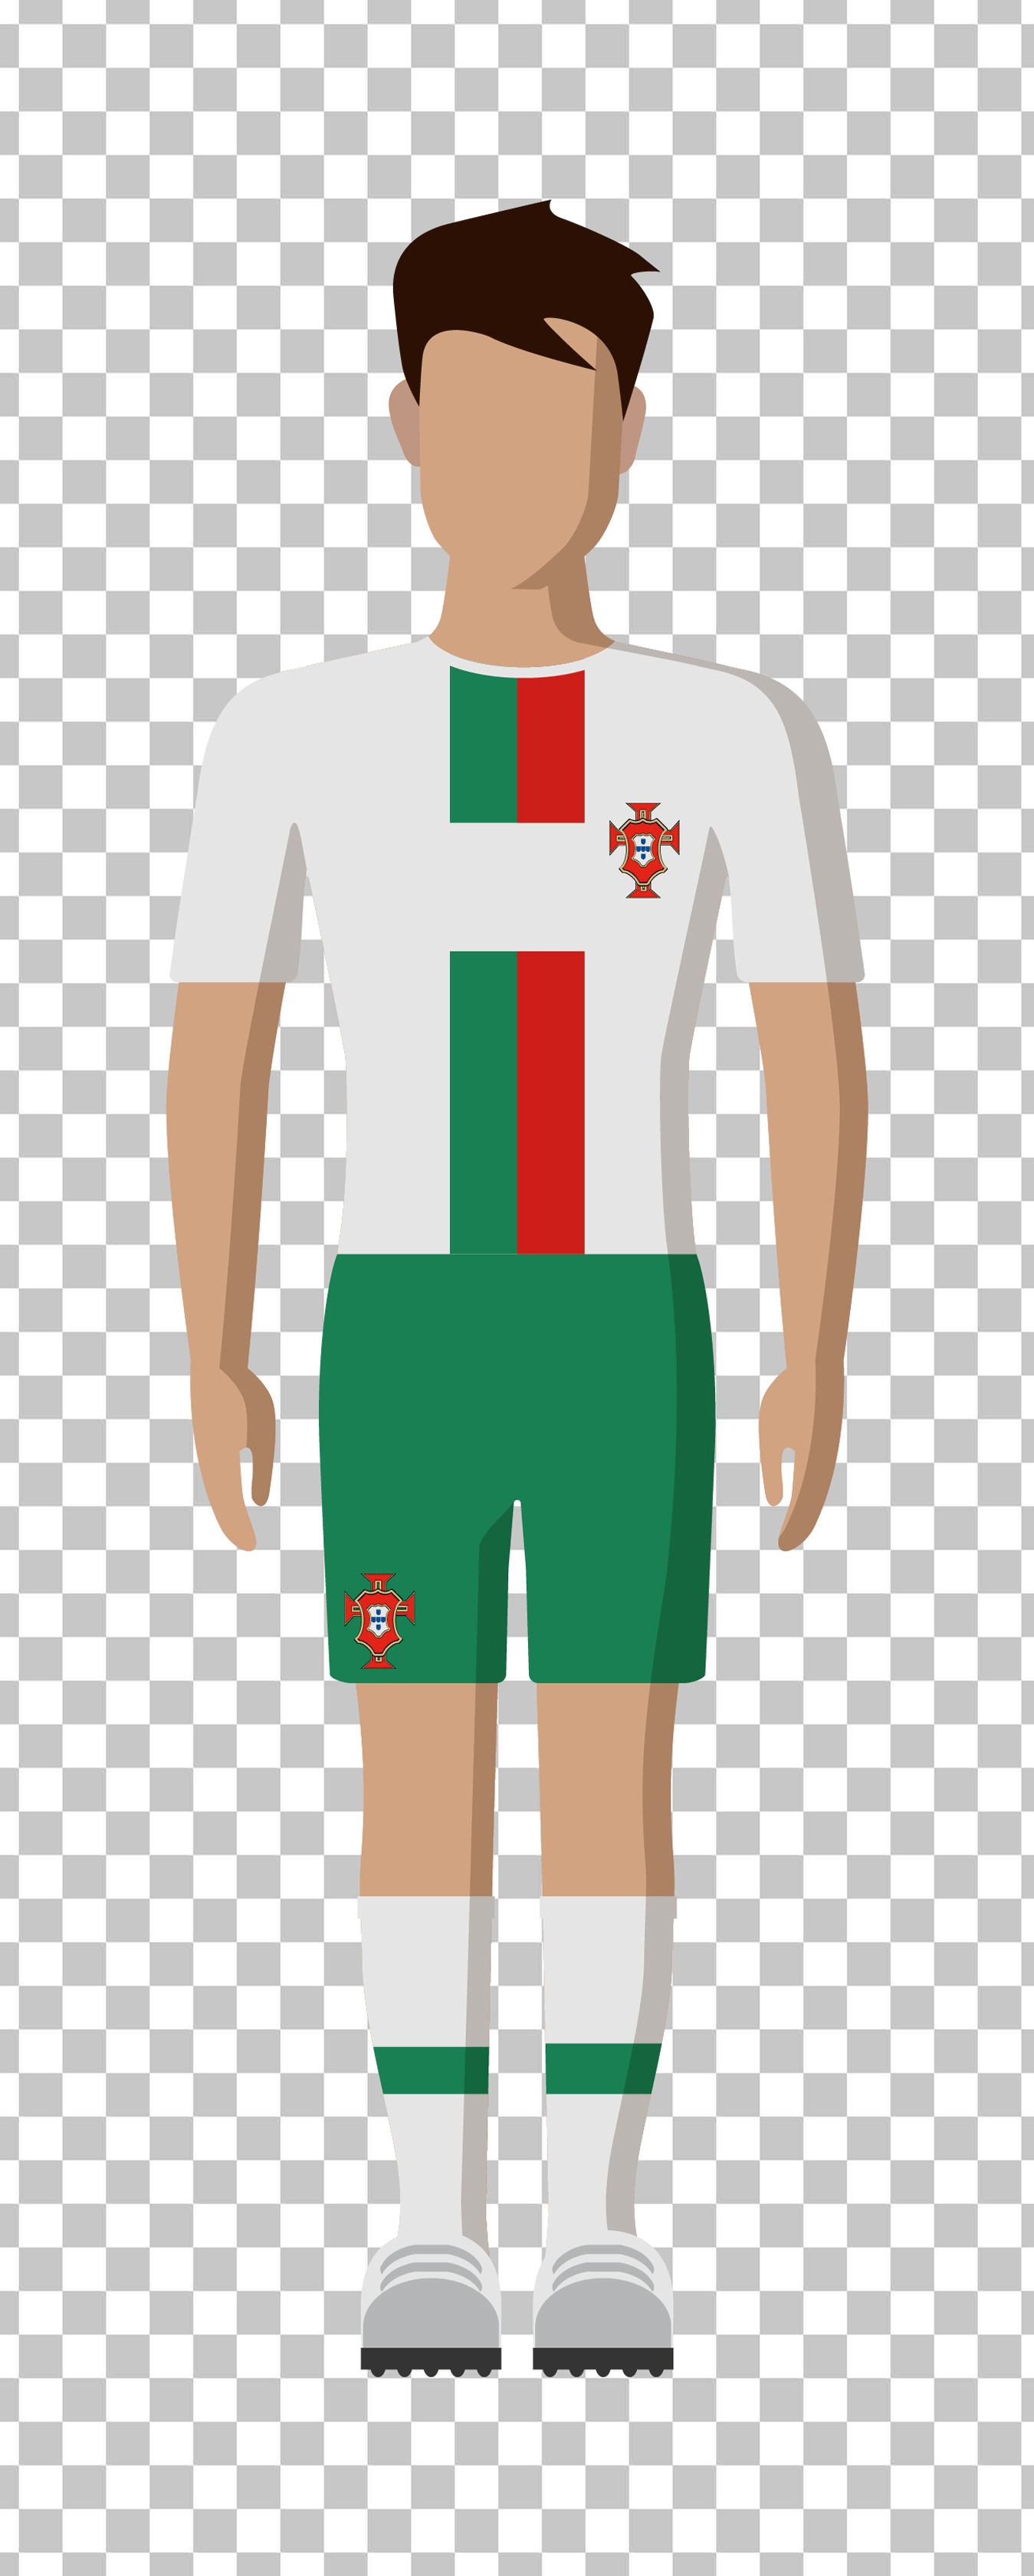 Player with Portugal Football Away Jersey